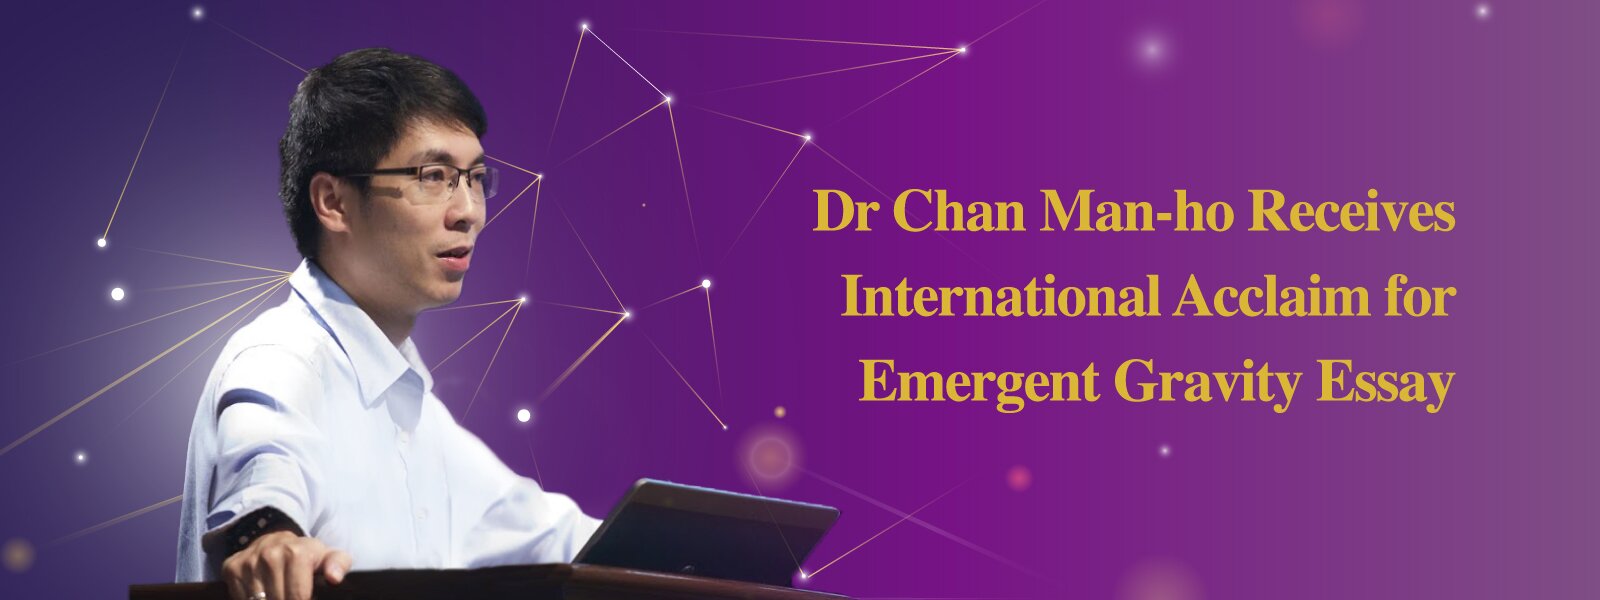 Dr Chan Man-ho Receives International Acclaim for Emergent Gravity Essay